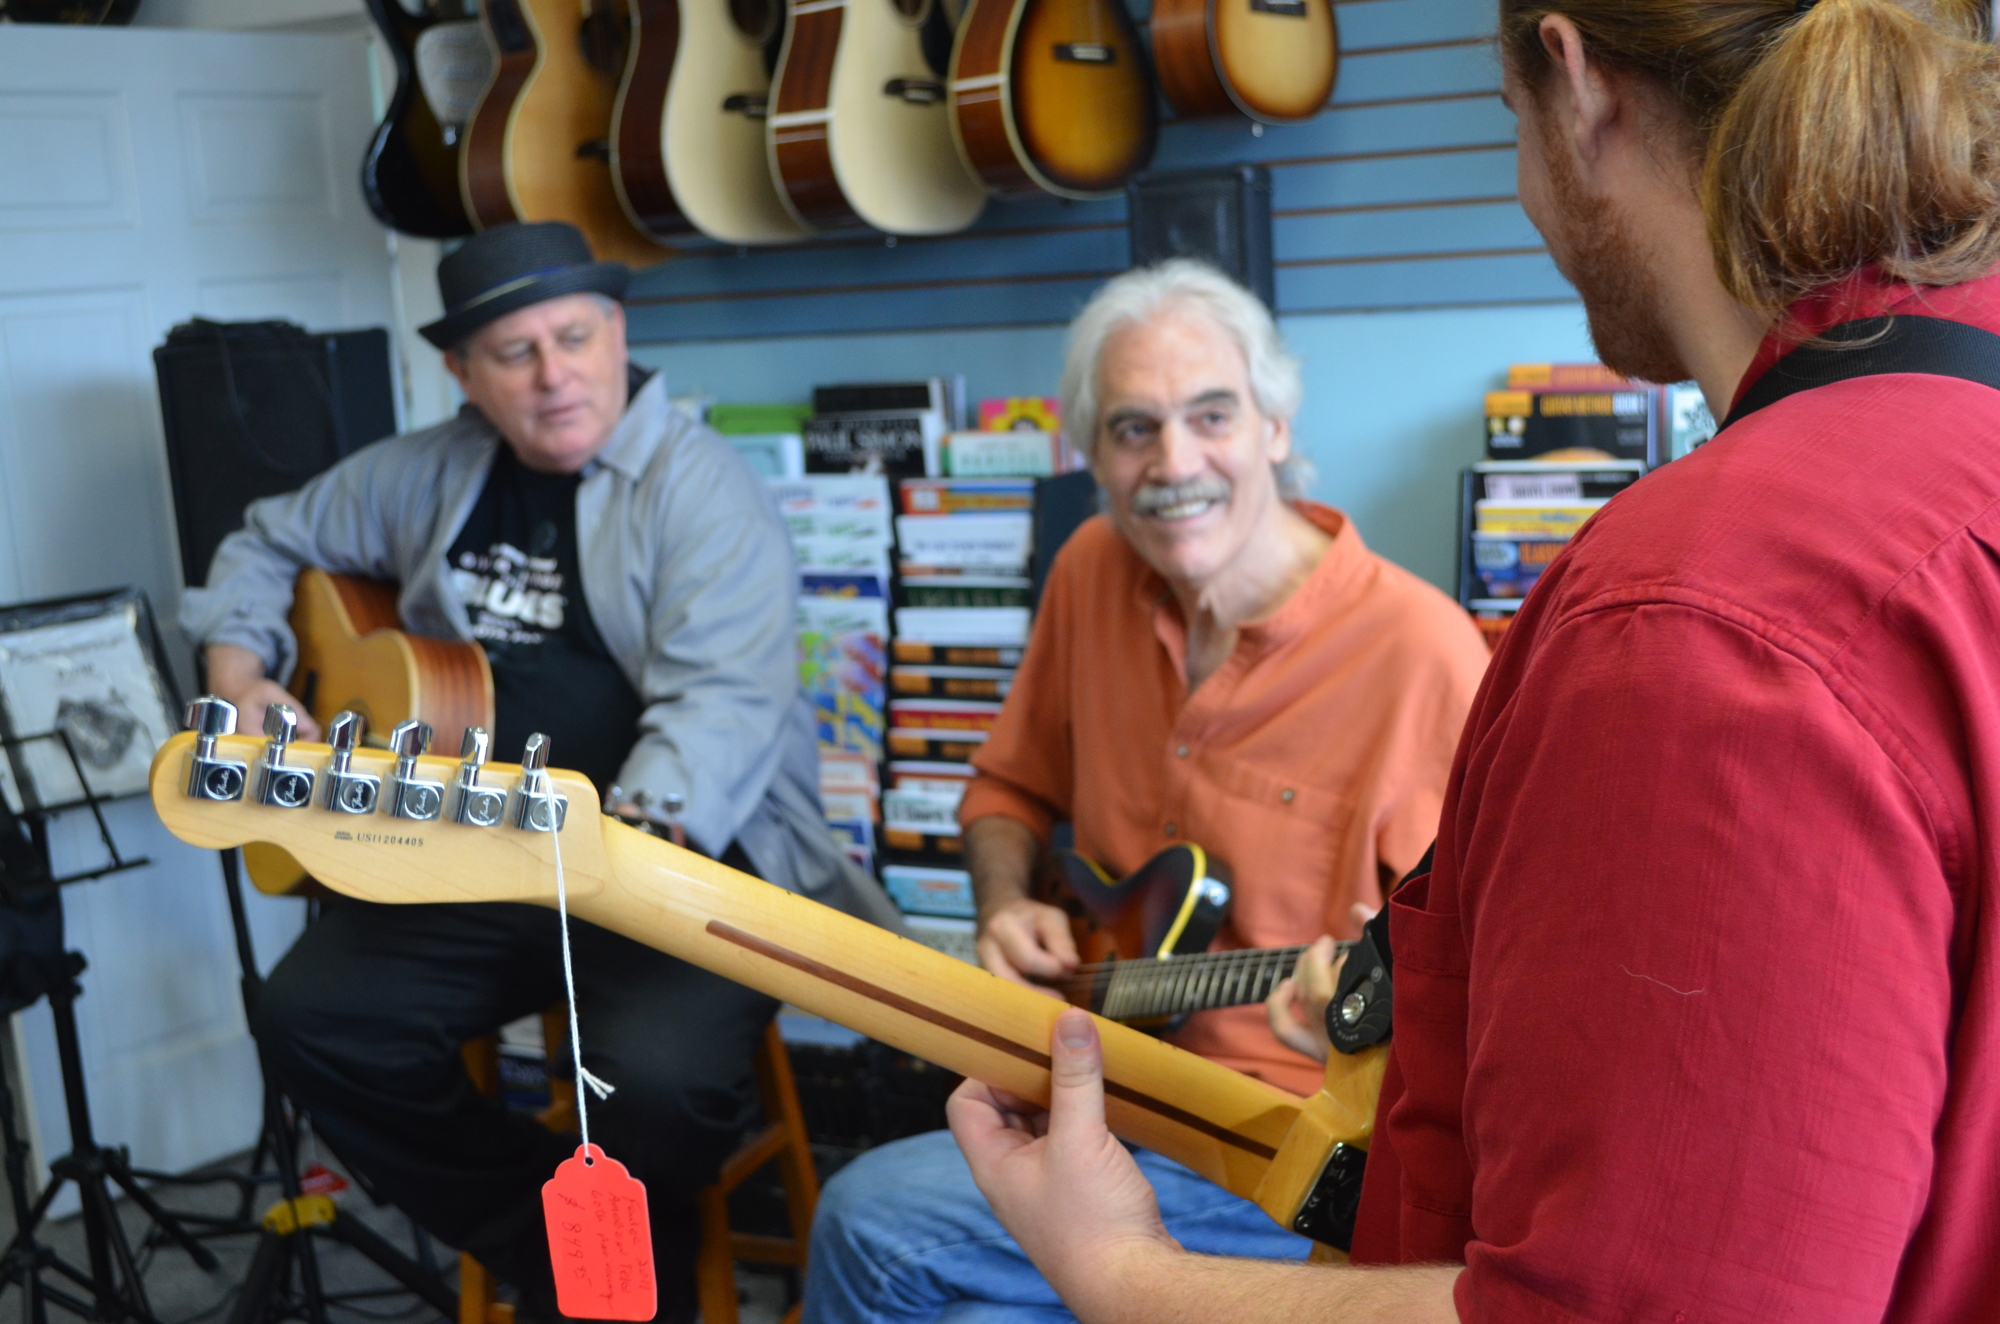 Bill Smith, Al Fuller and J.T. Click lead an impromptu jam session.